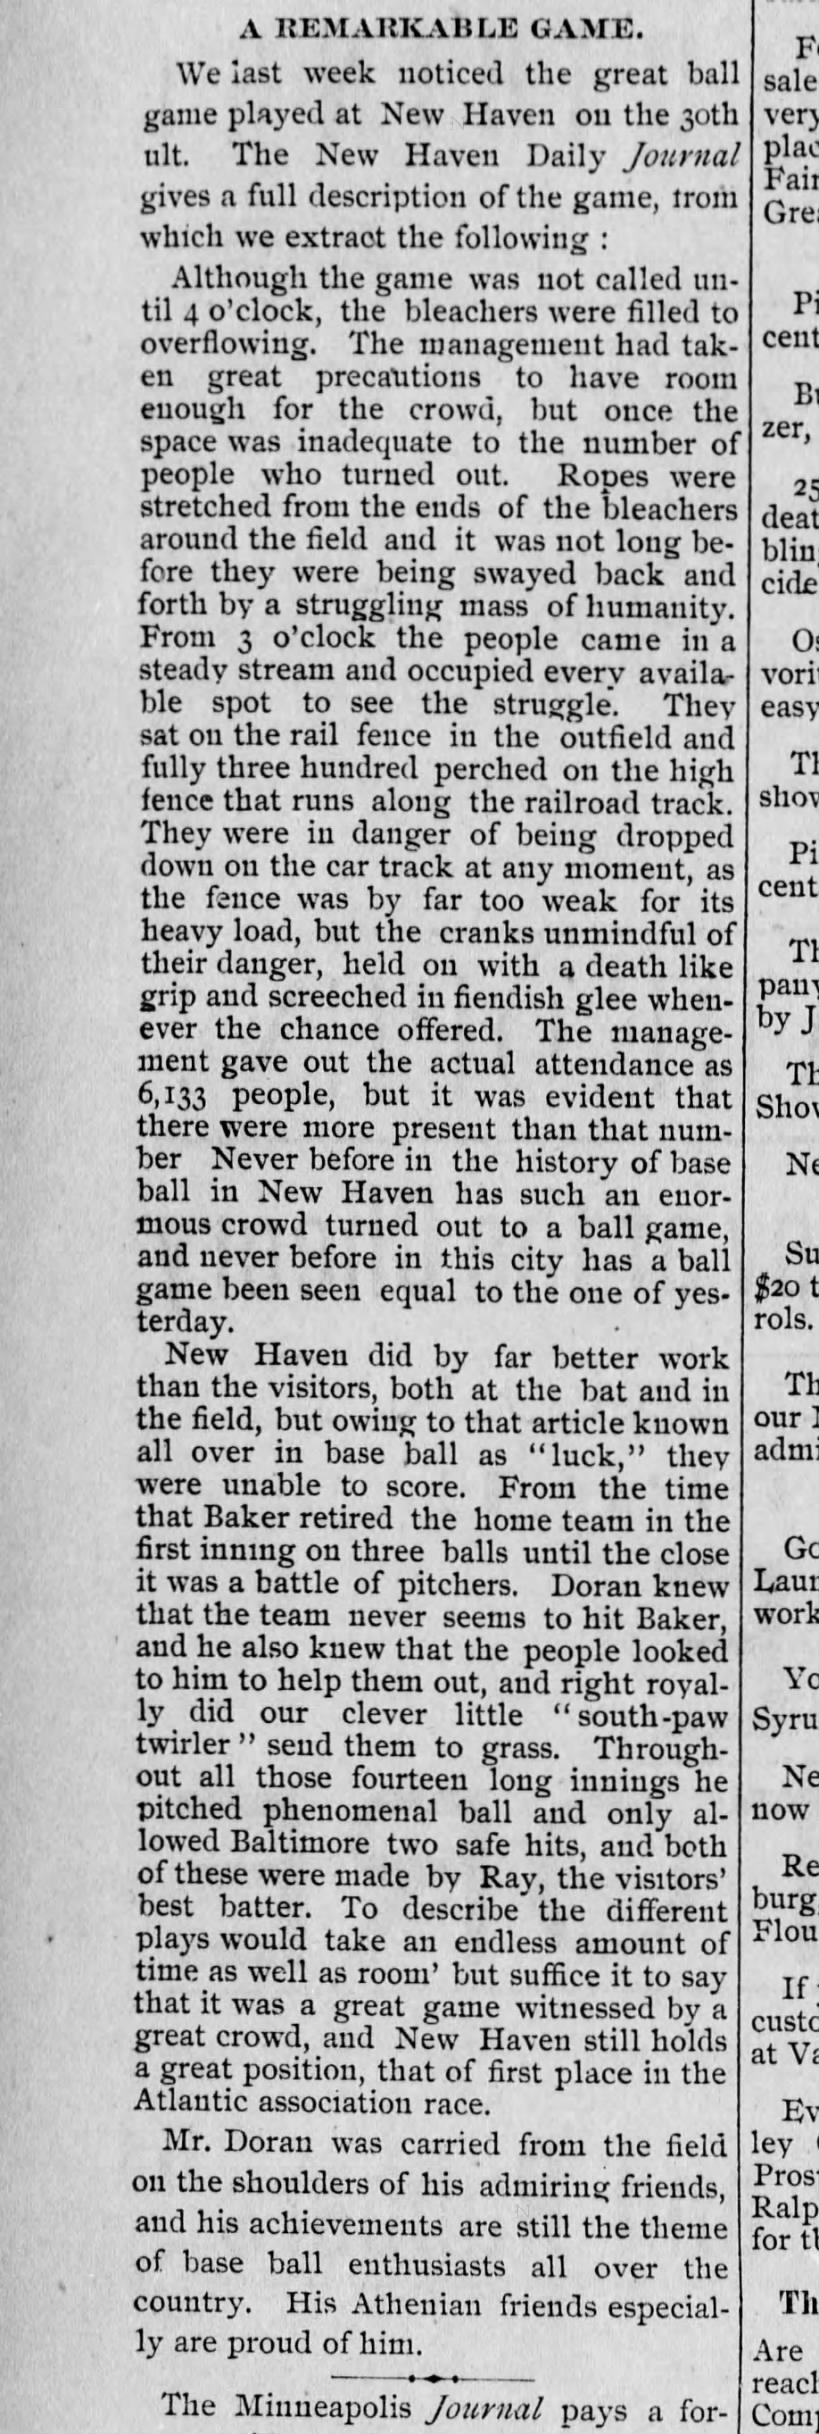 John Doran's remarkable game with New Haven 1890